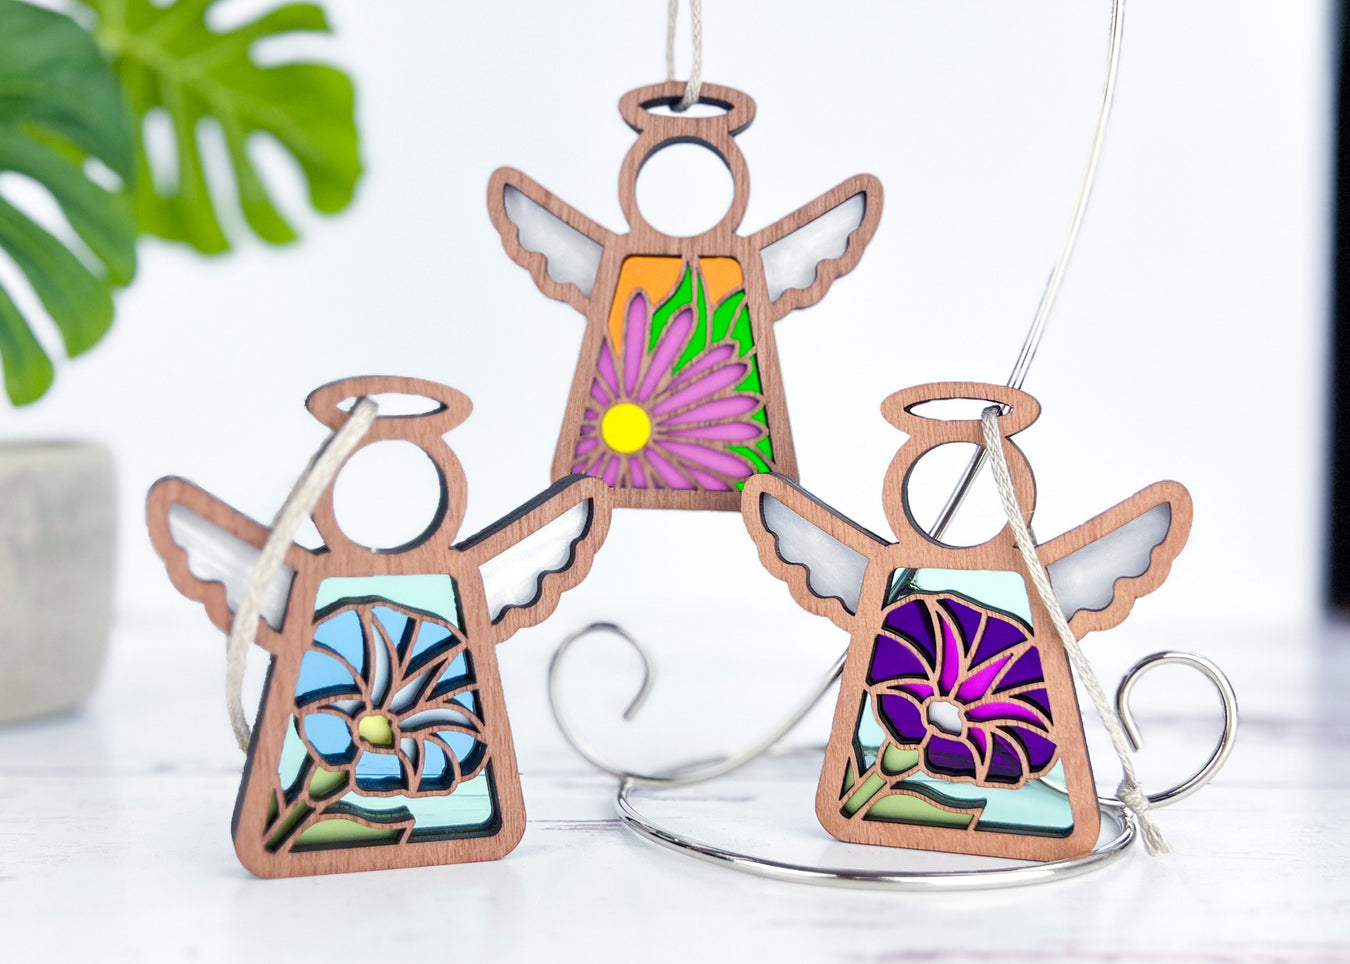 Angel ornaments featuring September birth month flowers, ideal birthday gift ideas for a wife, best friend or special women, showcasing vibrant aster and morning glory birth flowers in a stained glass inspired style.